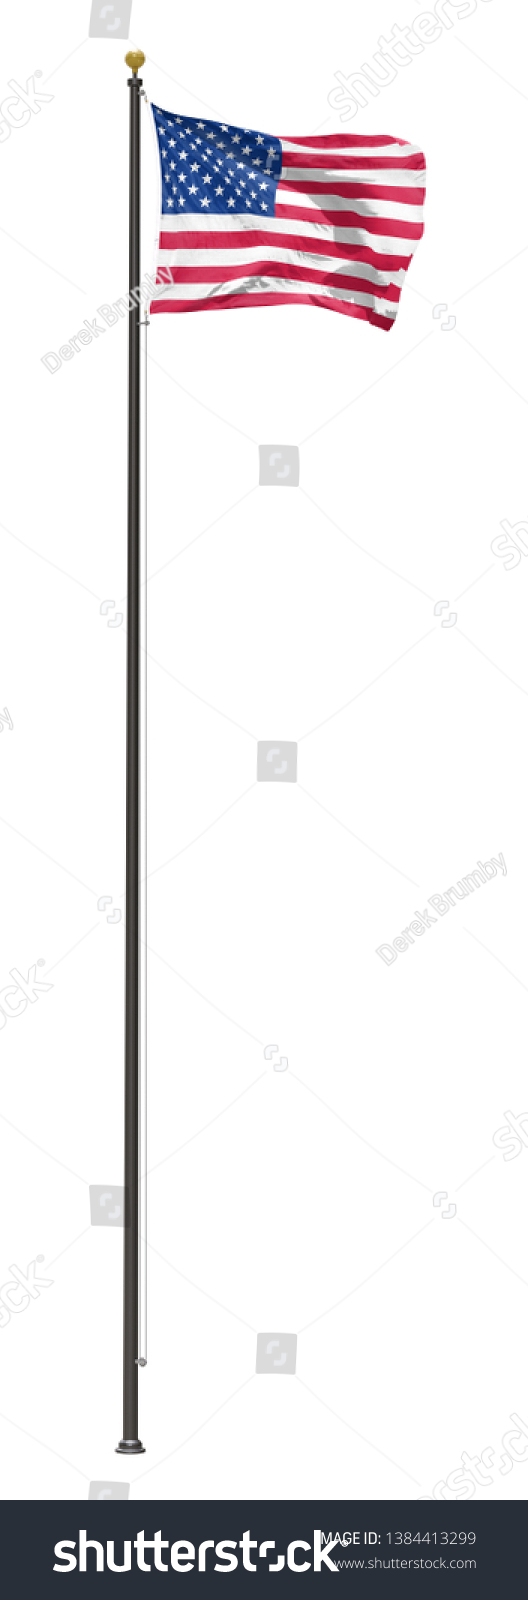 American flag on a pole, isolated on a white background #1384413299